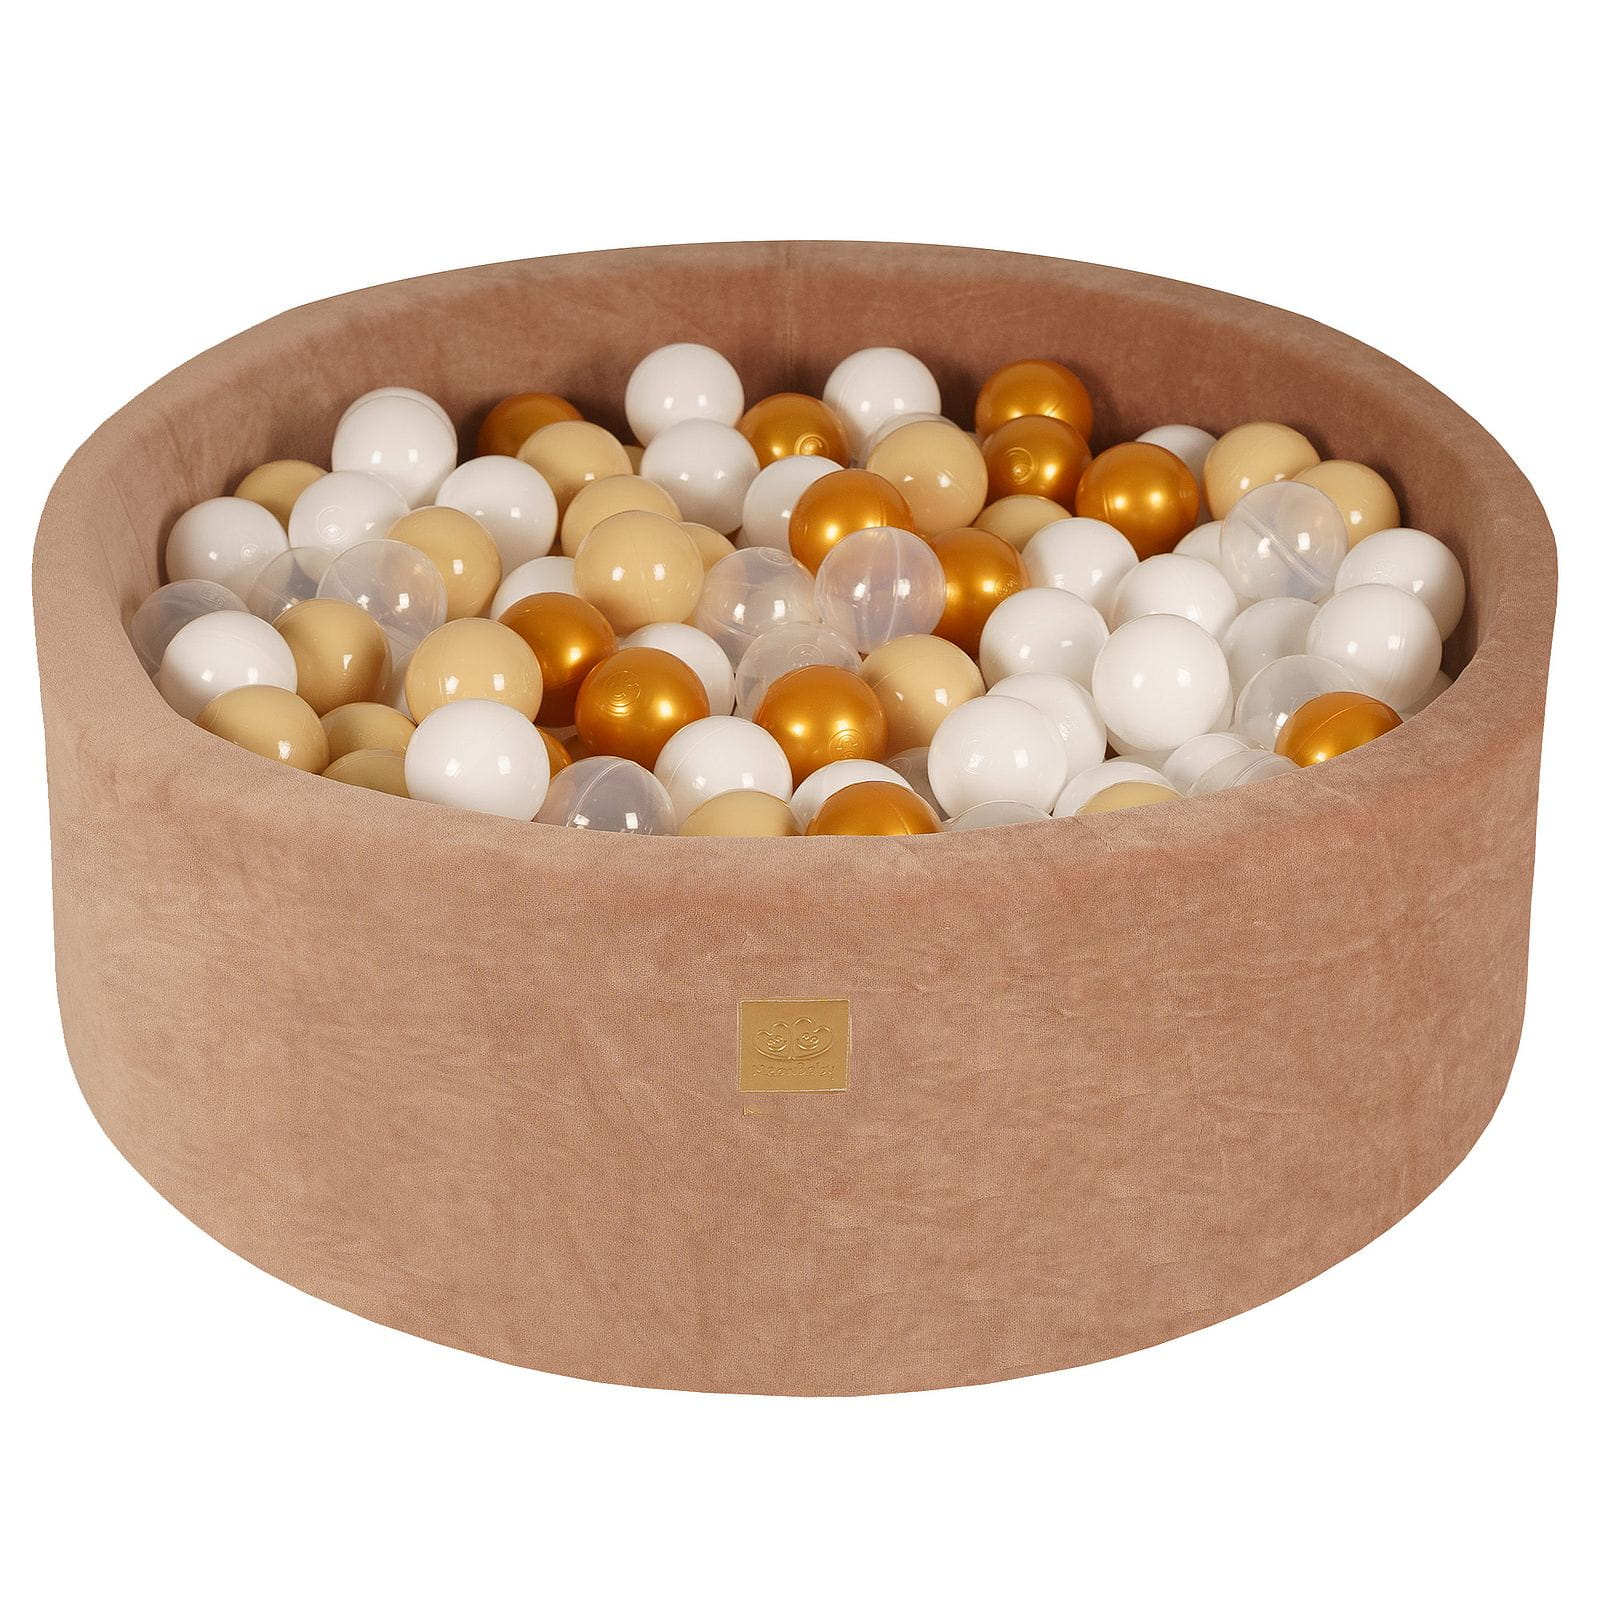 MEOW BABY Ball Pit with 200 Balls 2.75in Included for Toddlers - Baby Soft Foam Round Playpen, Velvet, Beige: Gold/Beige/White/Transparent